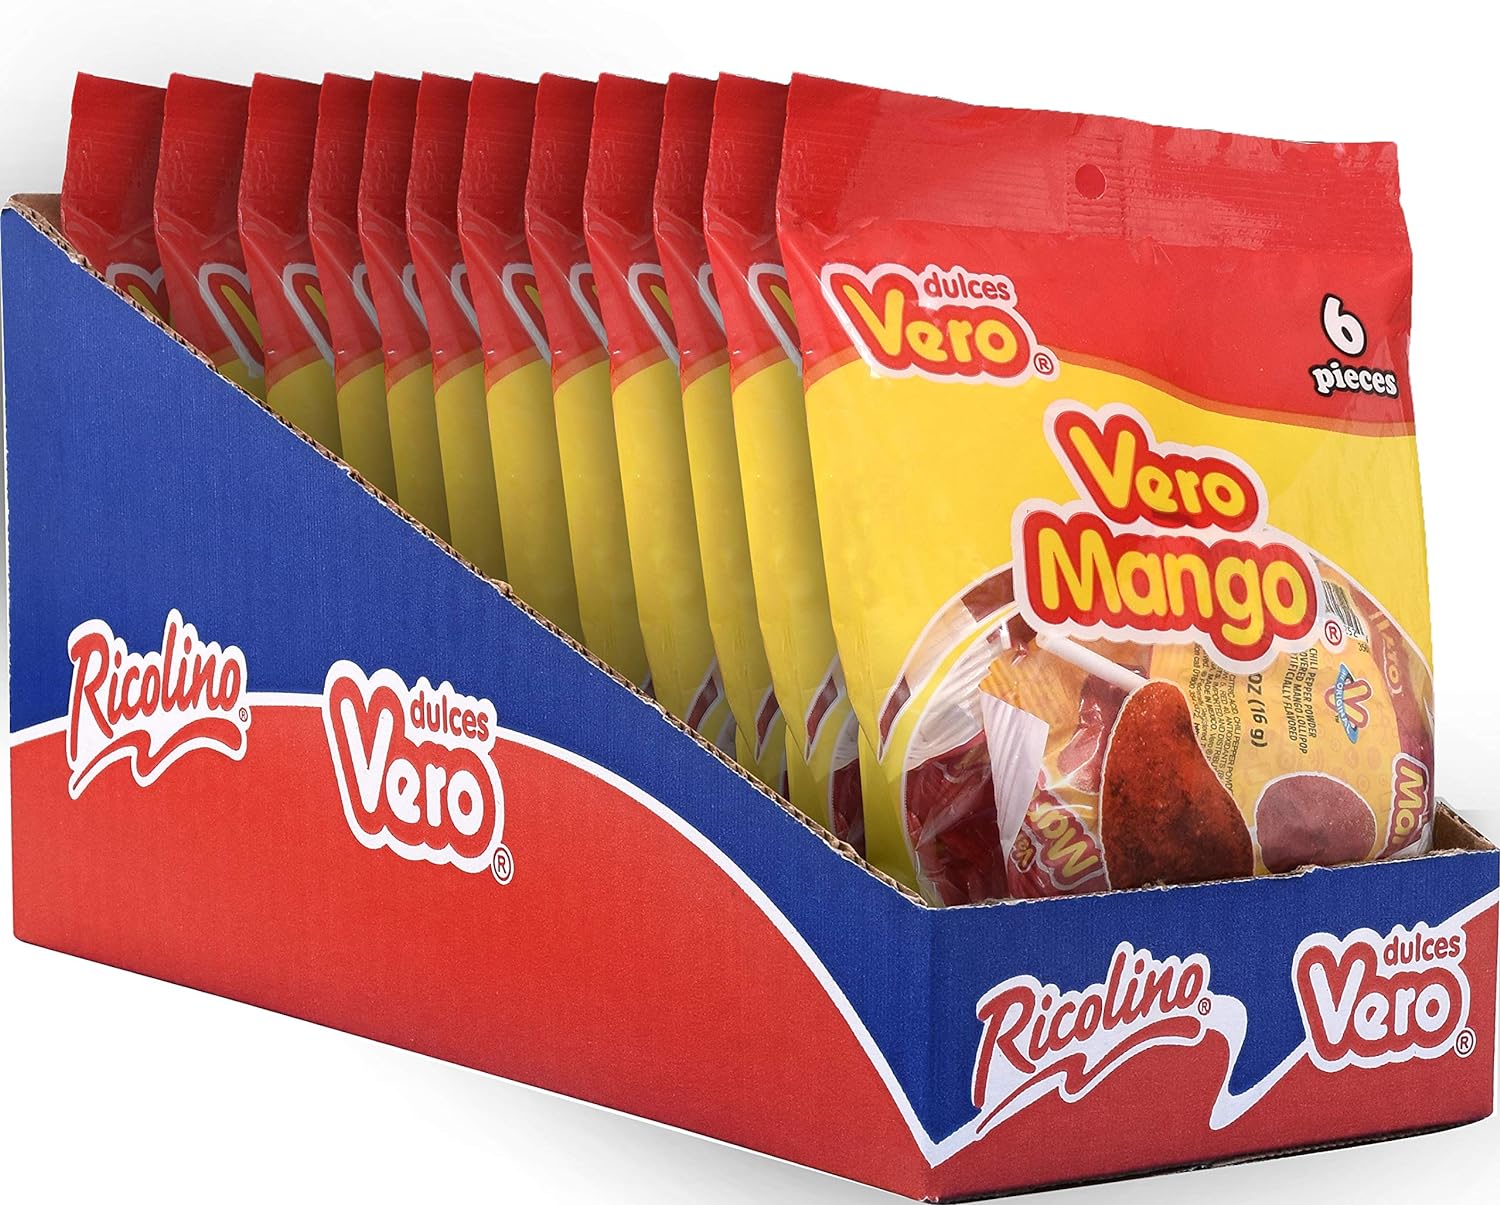  Vero Mango Lollipops - Mango and Chili Flavored Candy, 12 Bags with 6 Lollipops Each